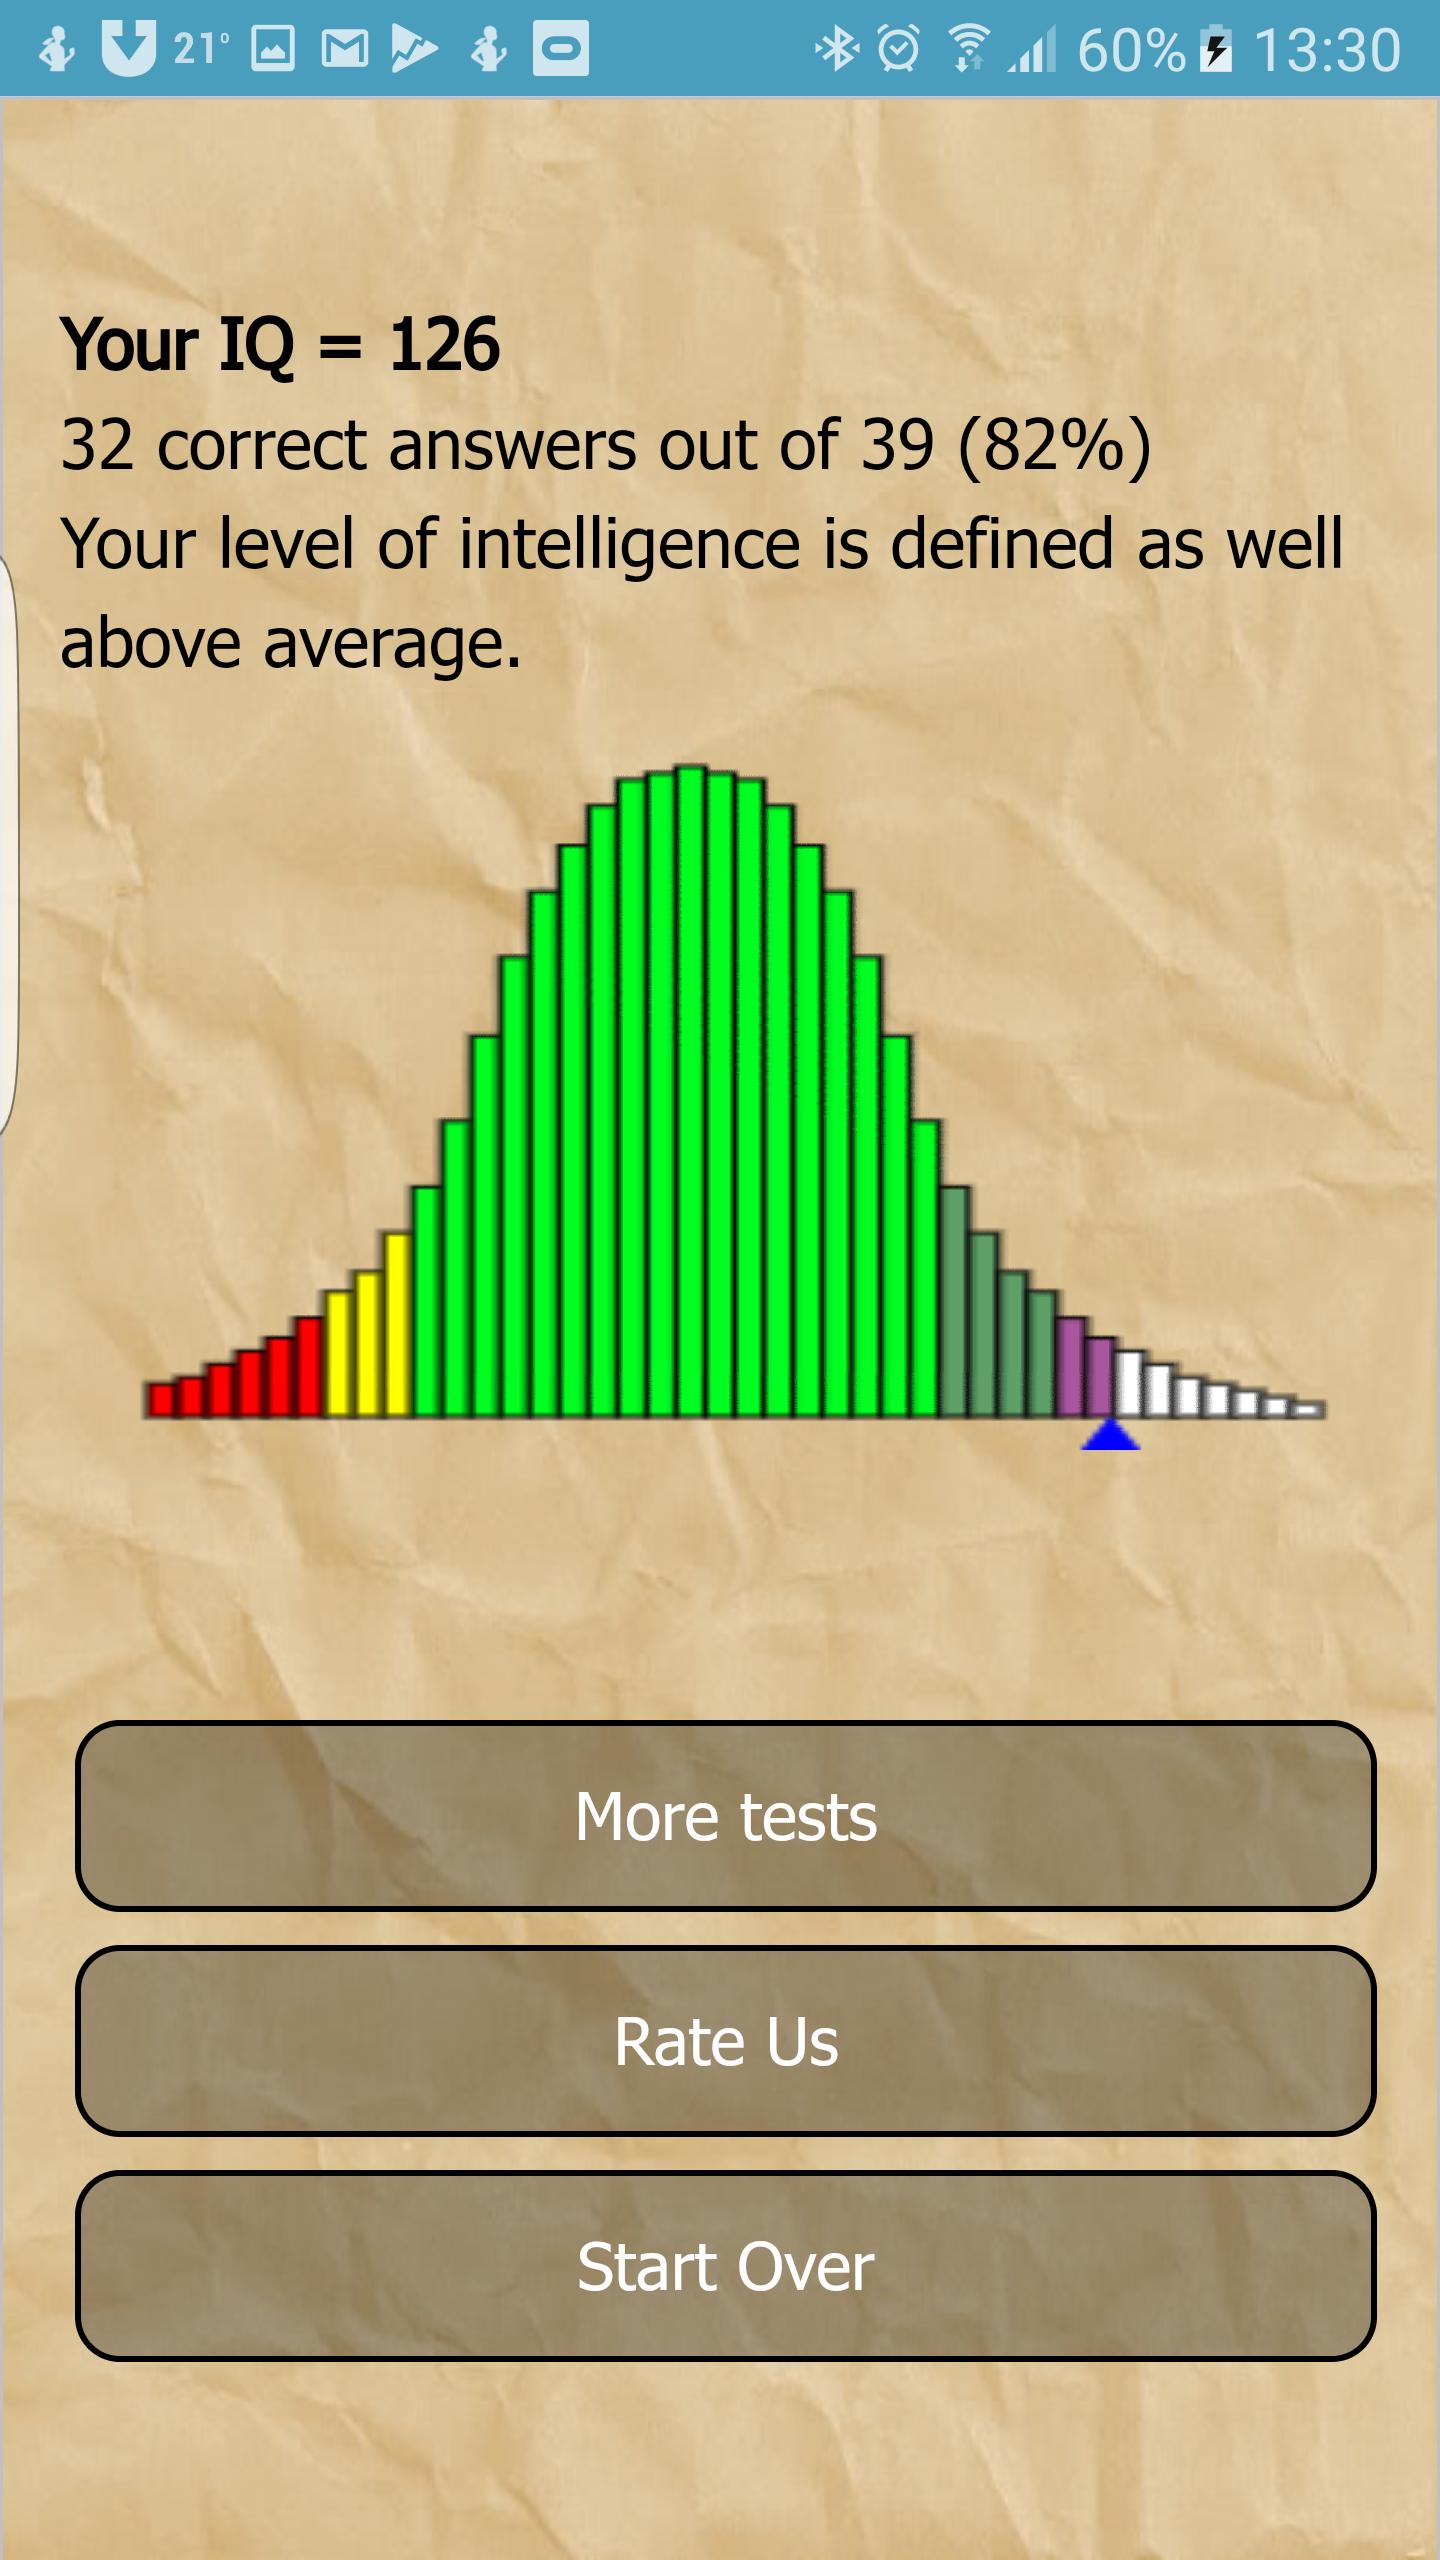 iq-test-apk-for-android-download